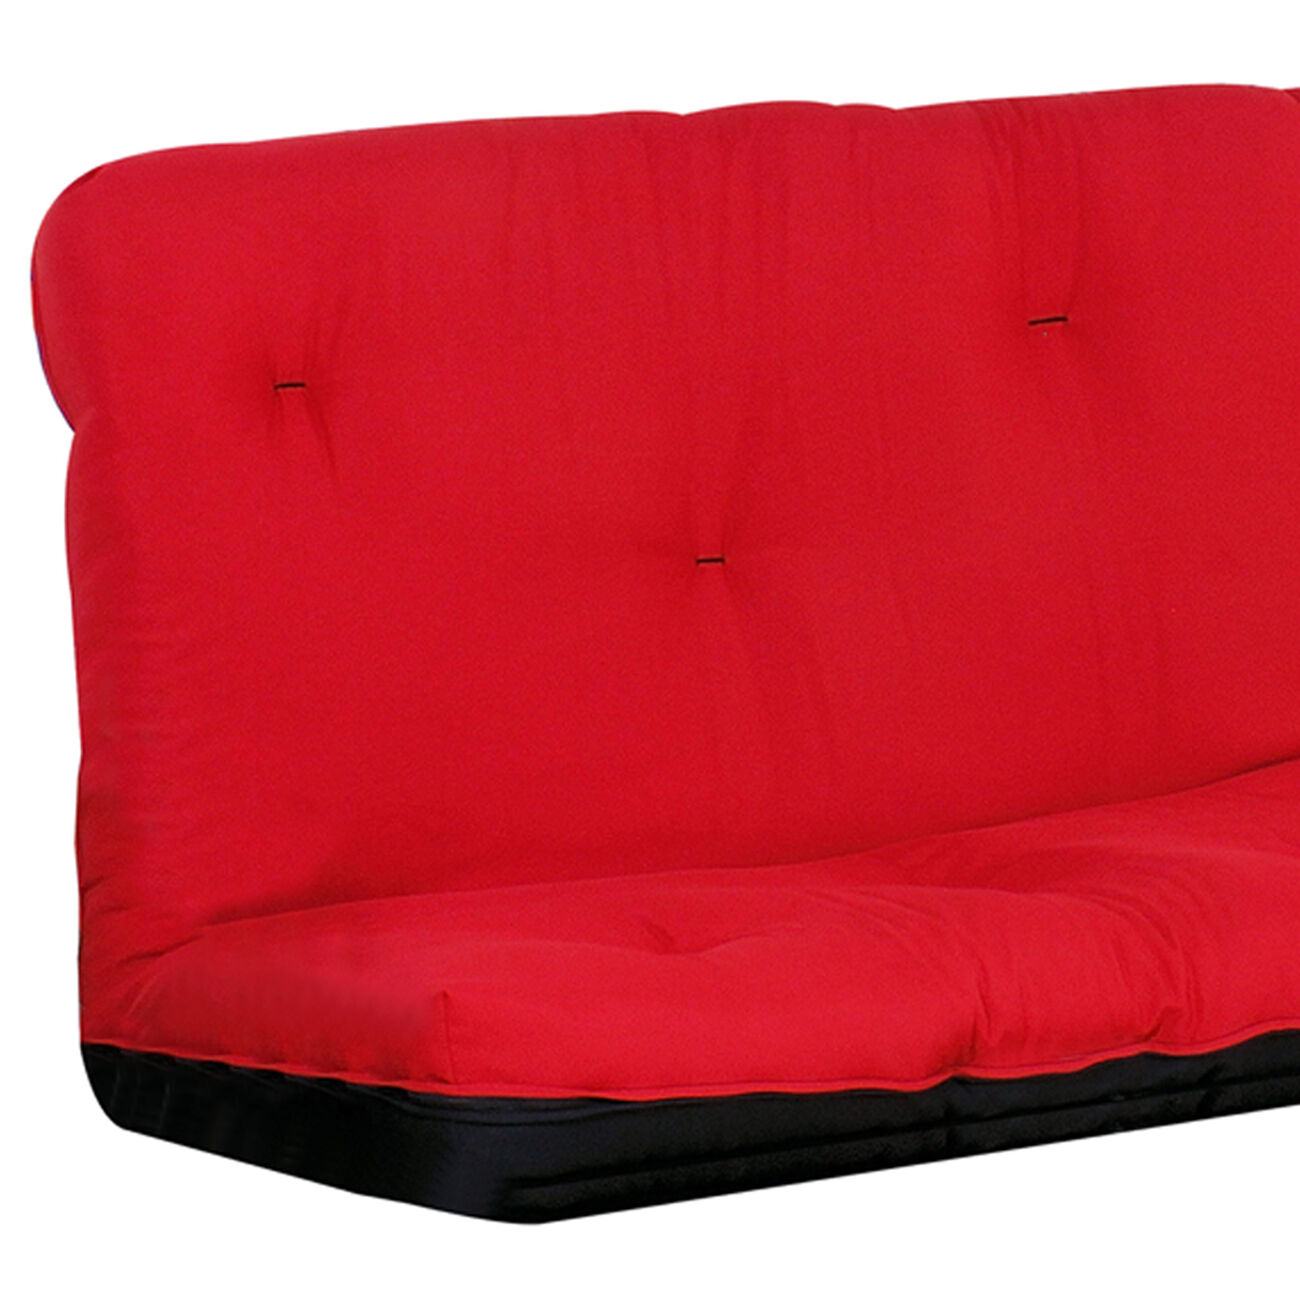 Full Size Reversible 6 inch Tufted Futon Mattress, Red and Black